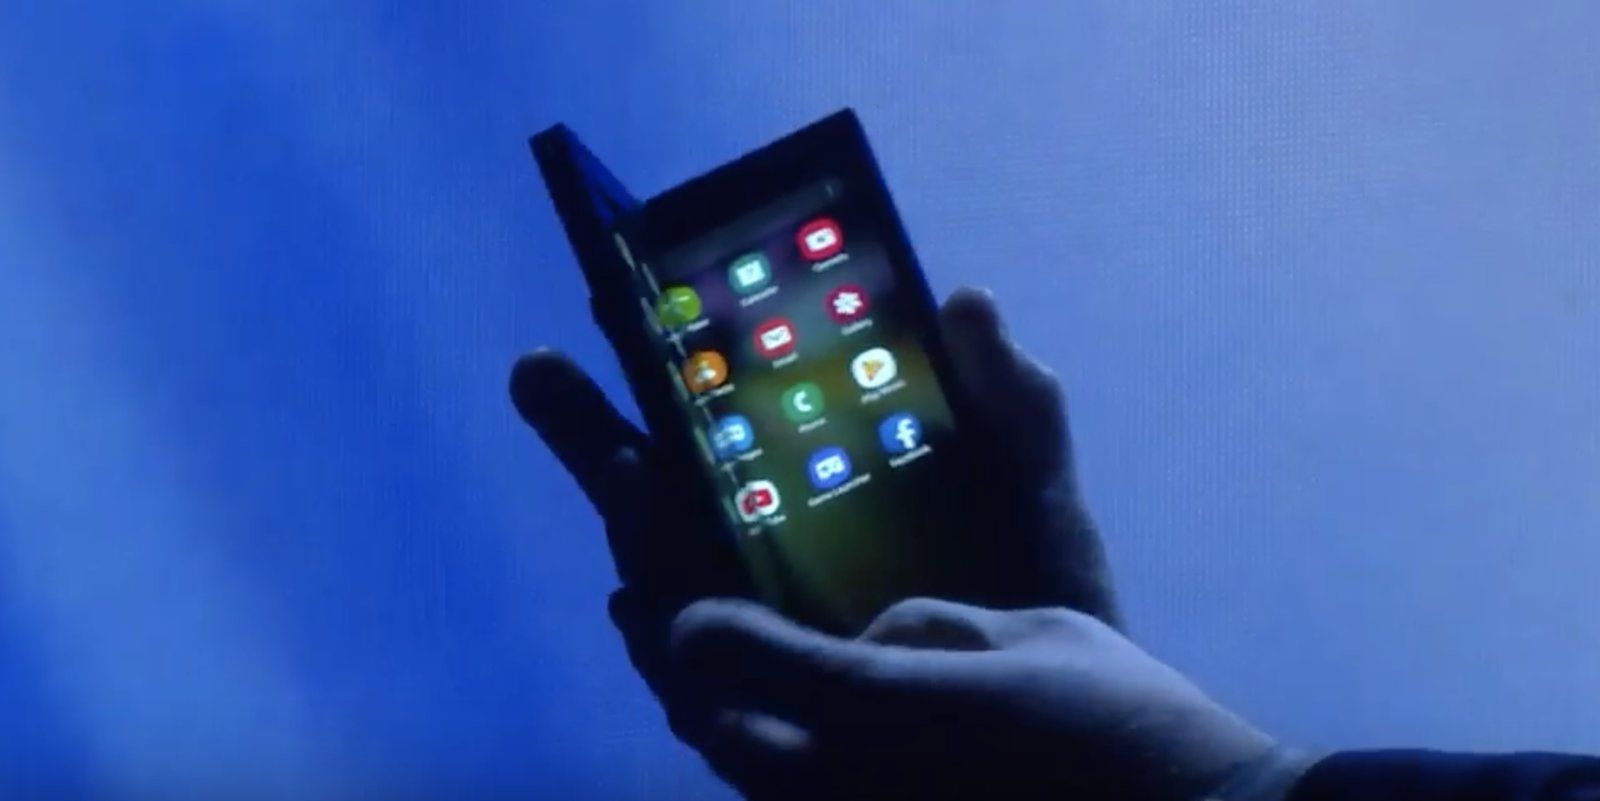 Samsung Infinity Flex: First foldable smartphone prototype design unveiled